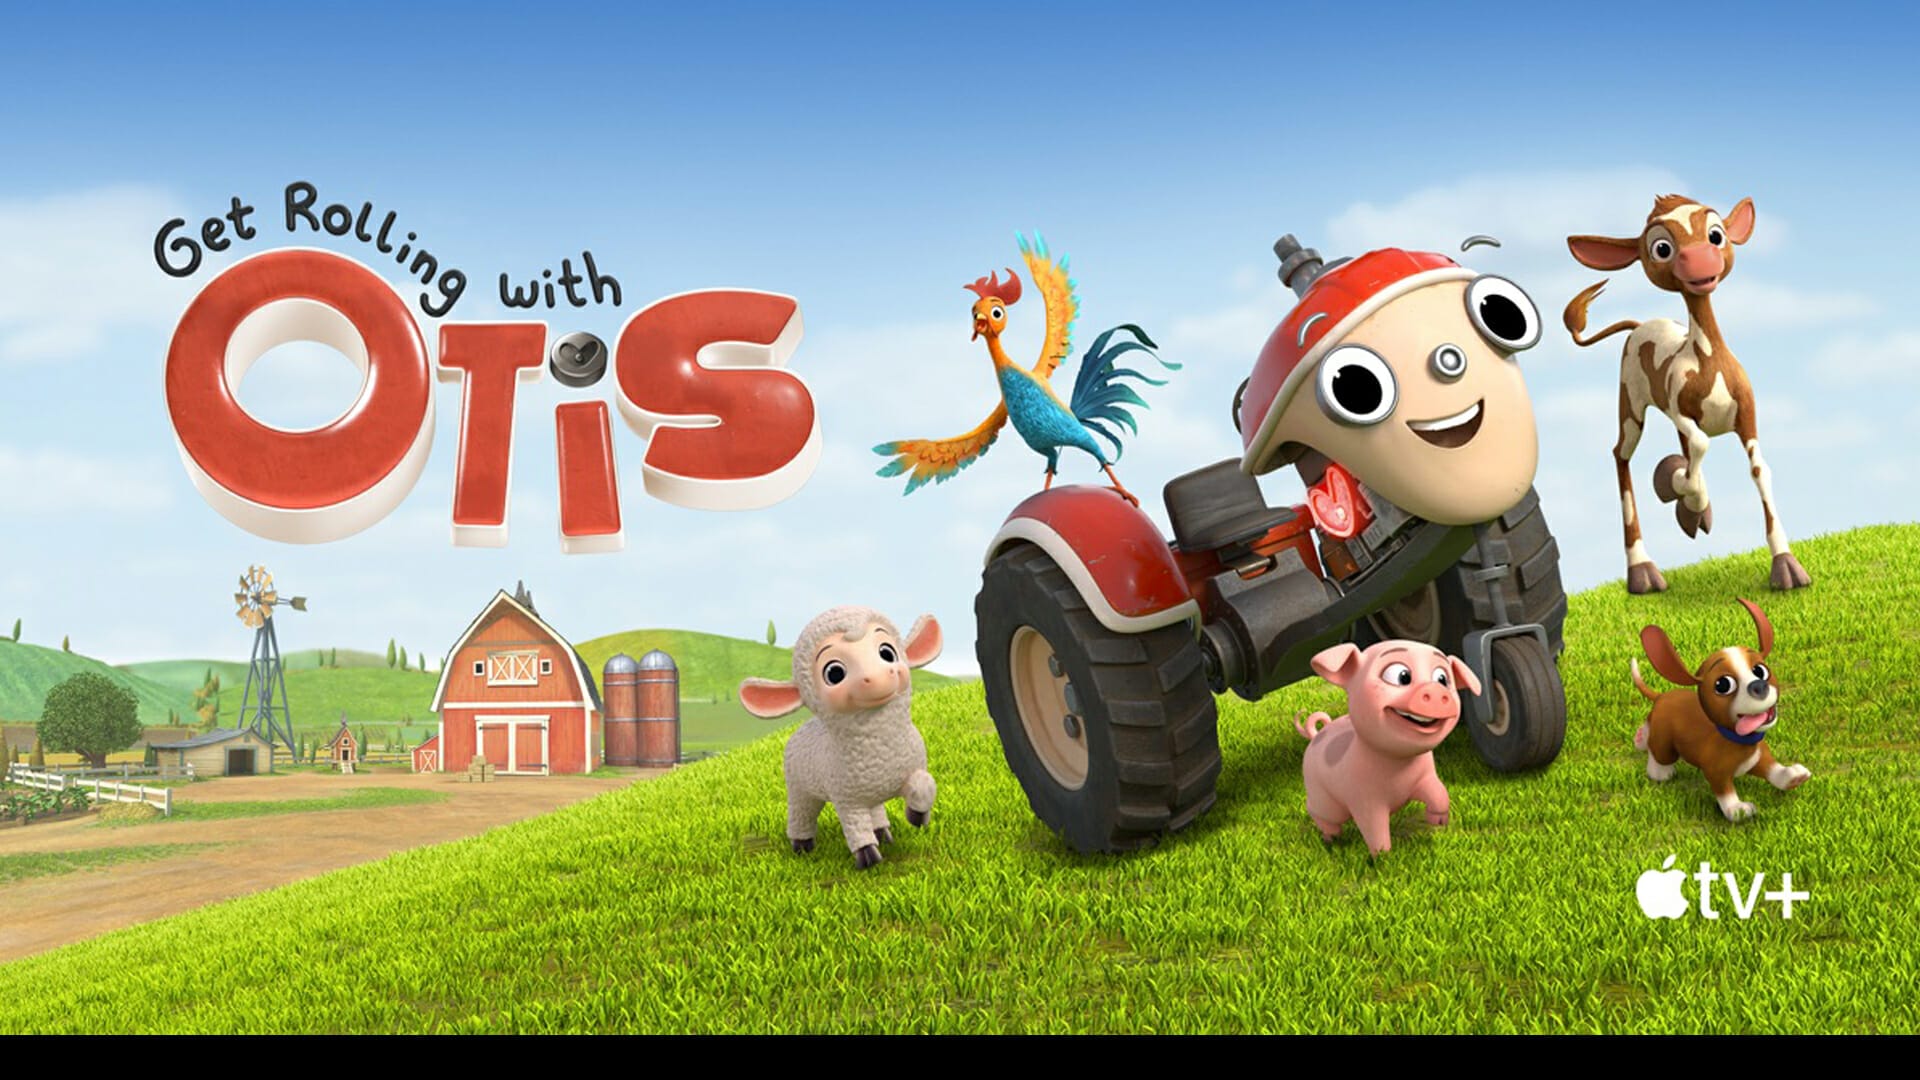 Promotional banner for M2 Animation's 'Get Rolling with Otis', an Apple Original. Features Otis, a red toy tractor, alongside cheerful farm animals including a calf, sheep, and a playful dog. The backdrop showcases a serene farm setting with a windmill. The banner emphasizes the collaboration with Apple TV+.